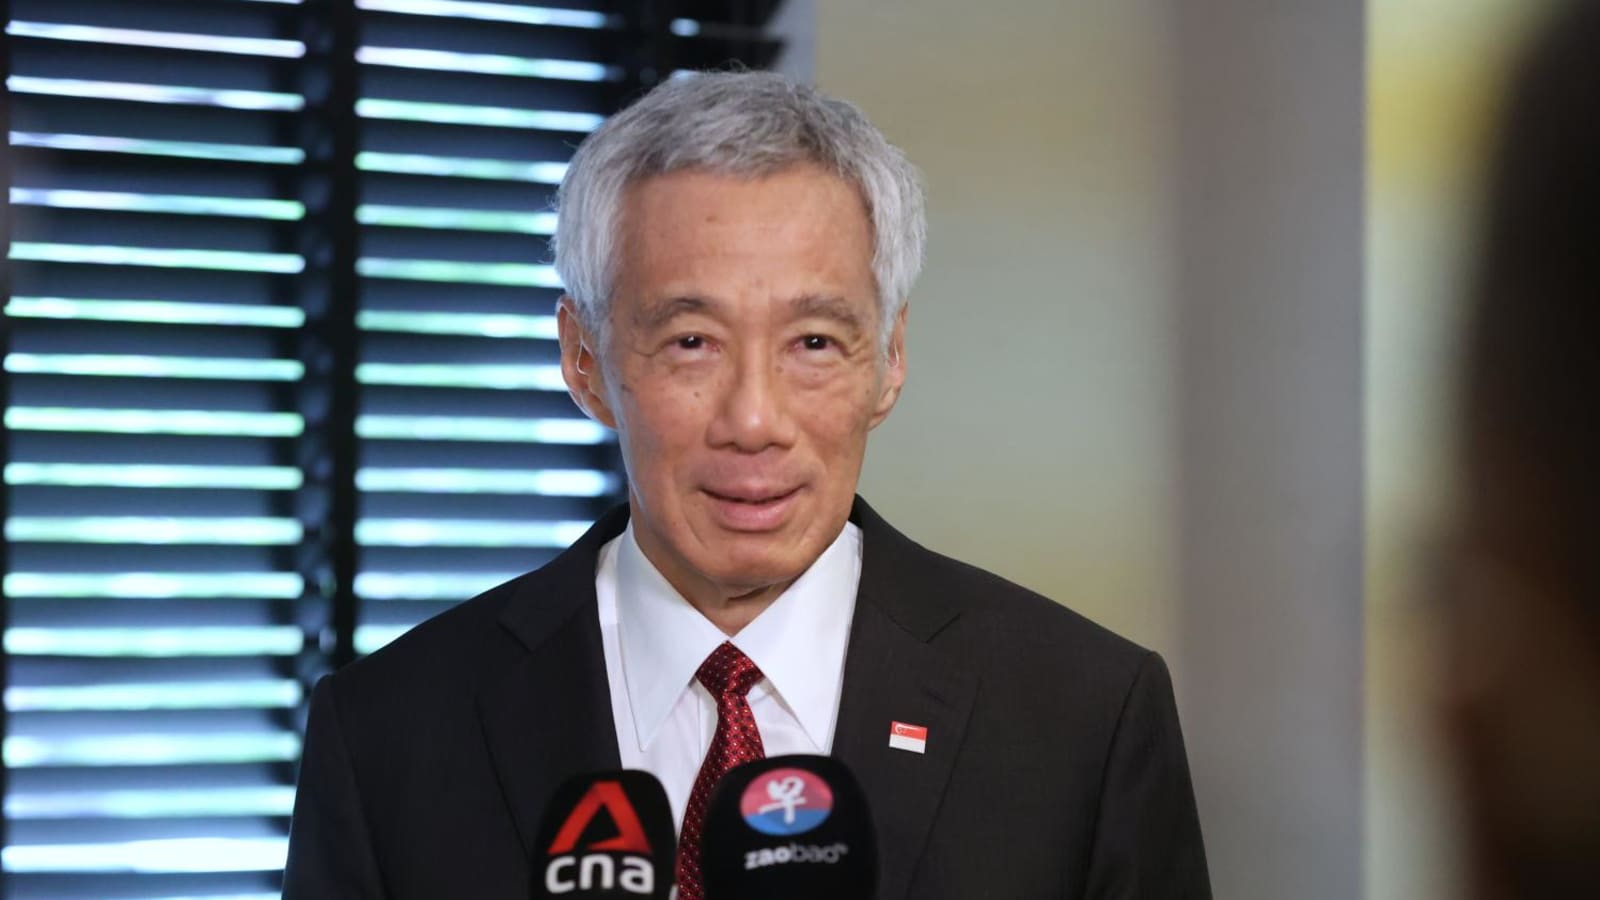 Inflation will become ‘very serious problem’ for the world if measures are not taken: PM Lee